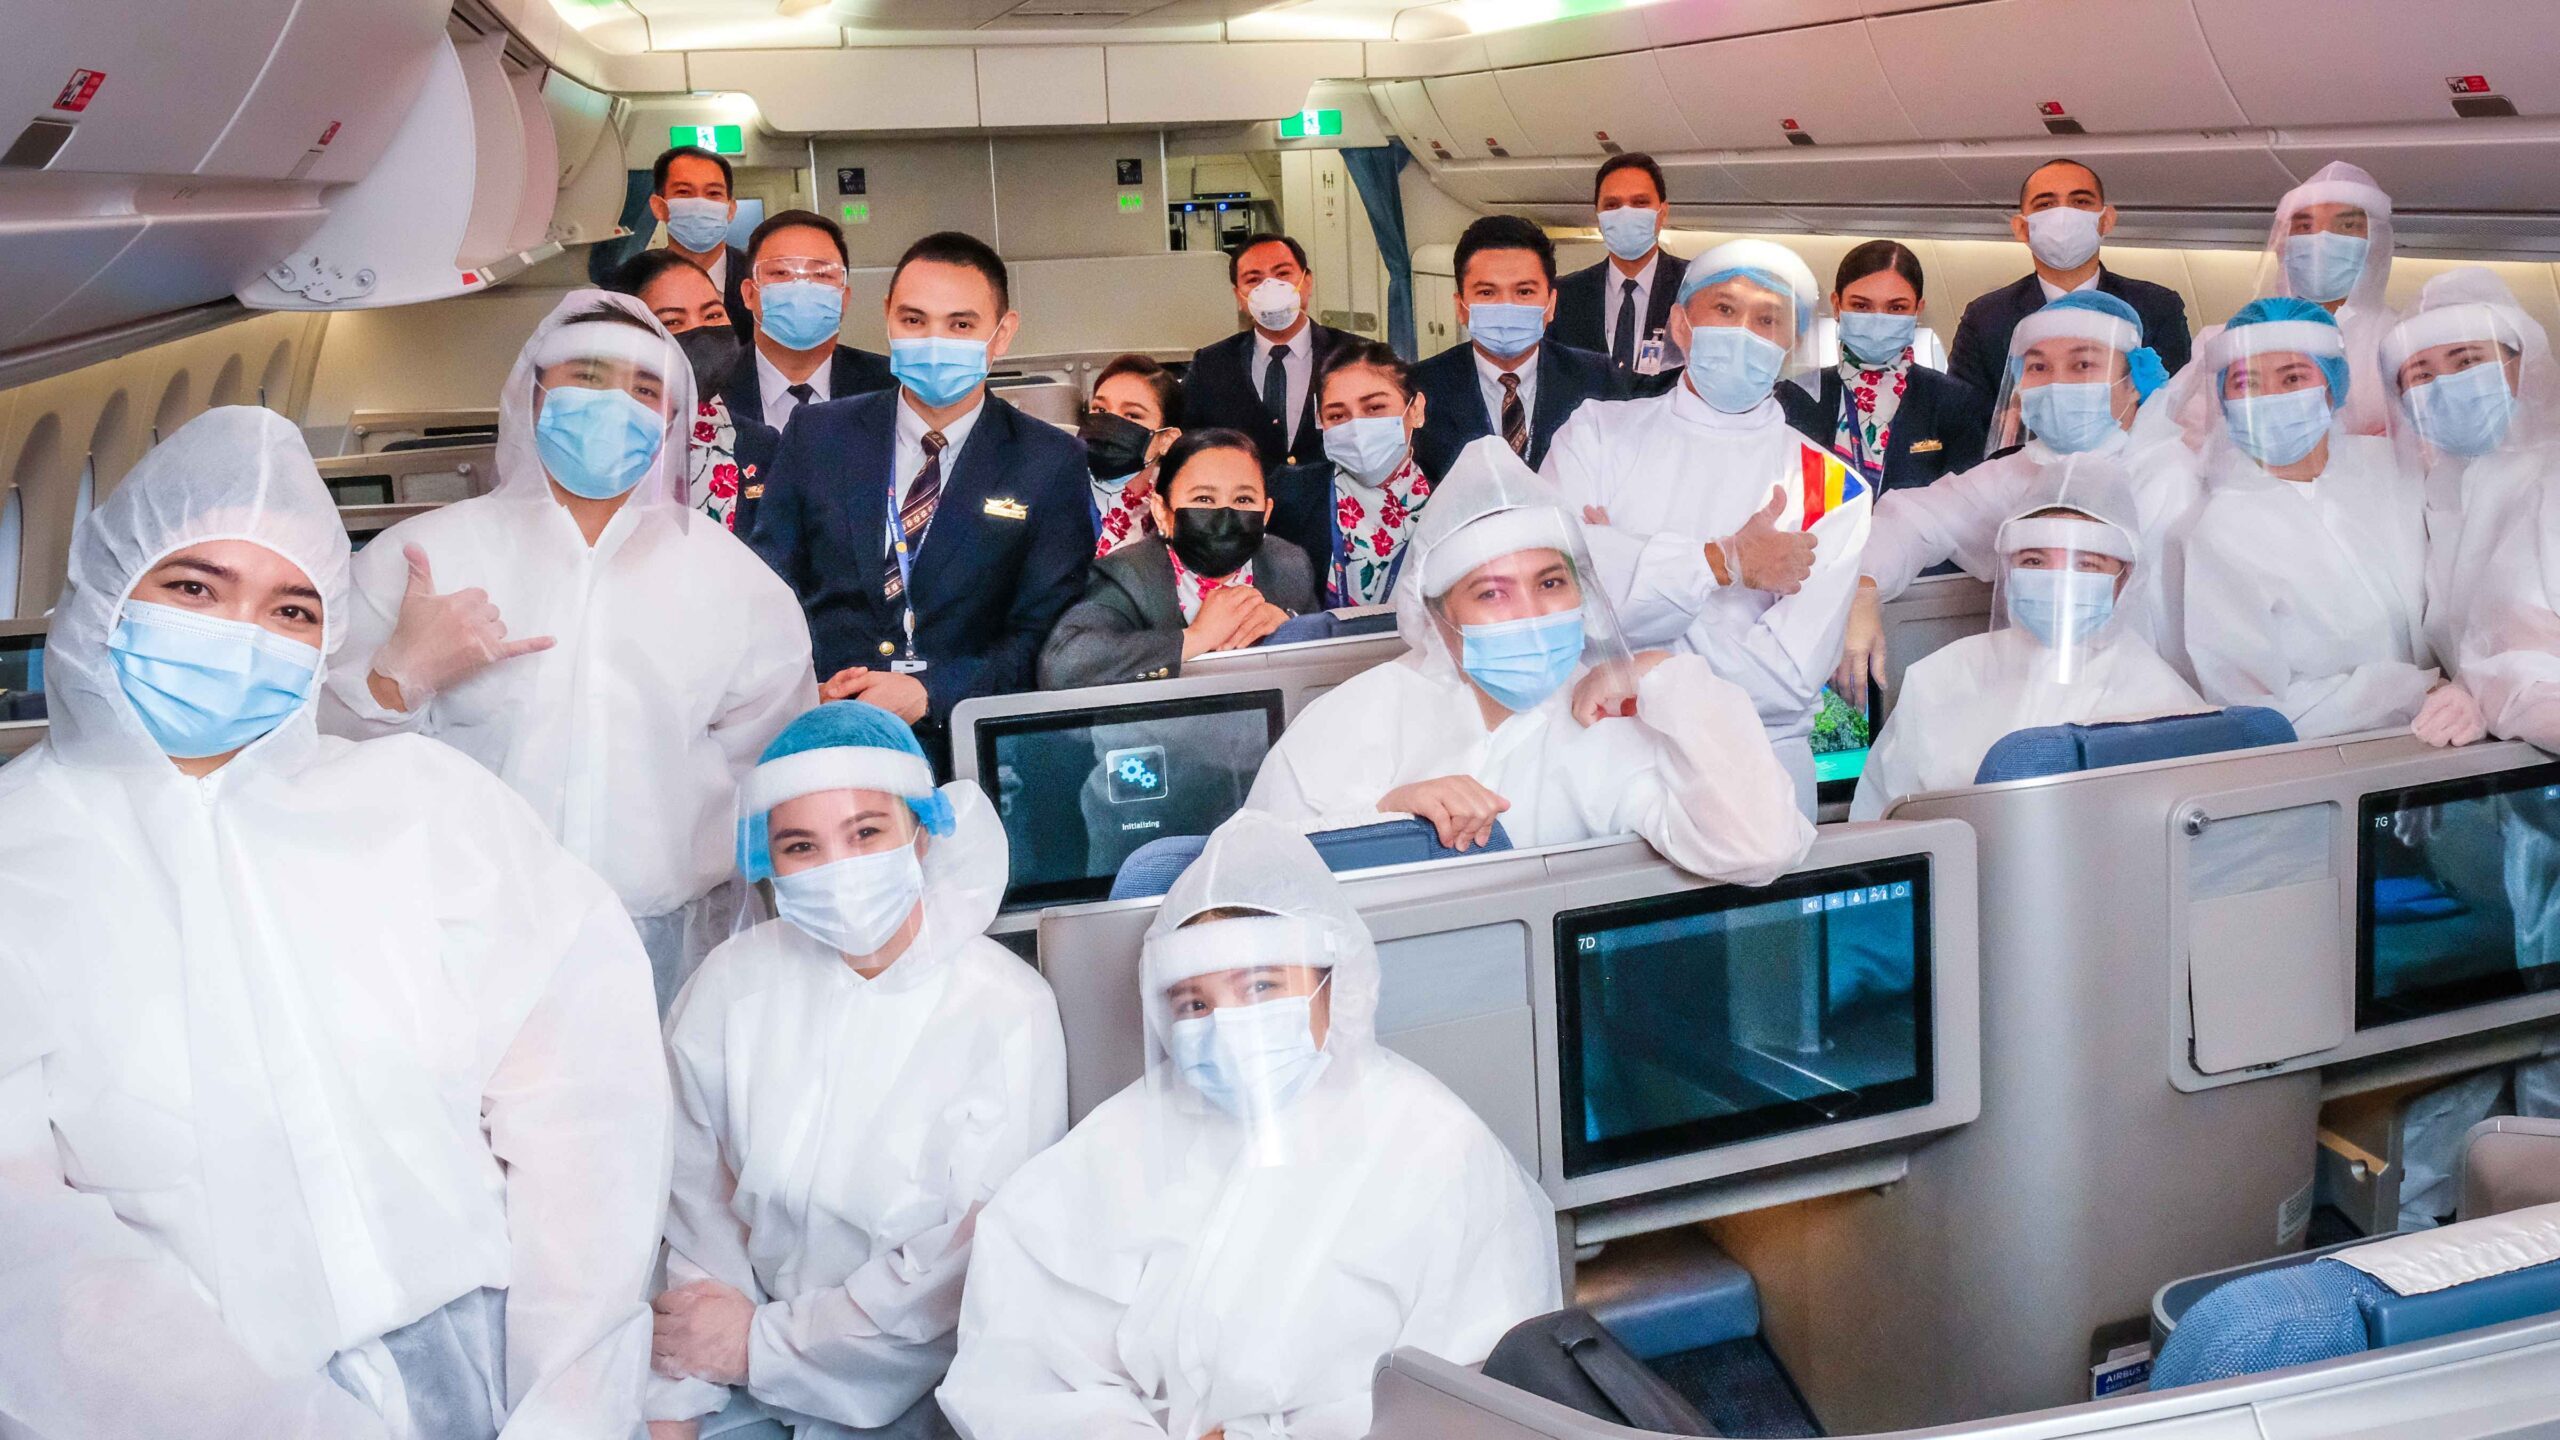 IN PHOTOS: Filipino pilot shows what it’s like to travel by air during a pandemic